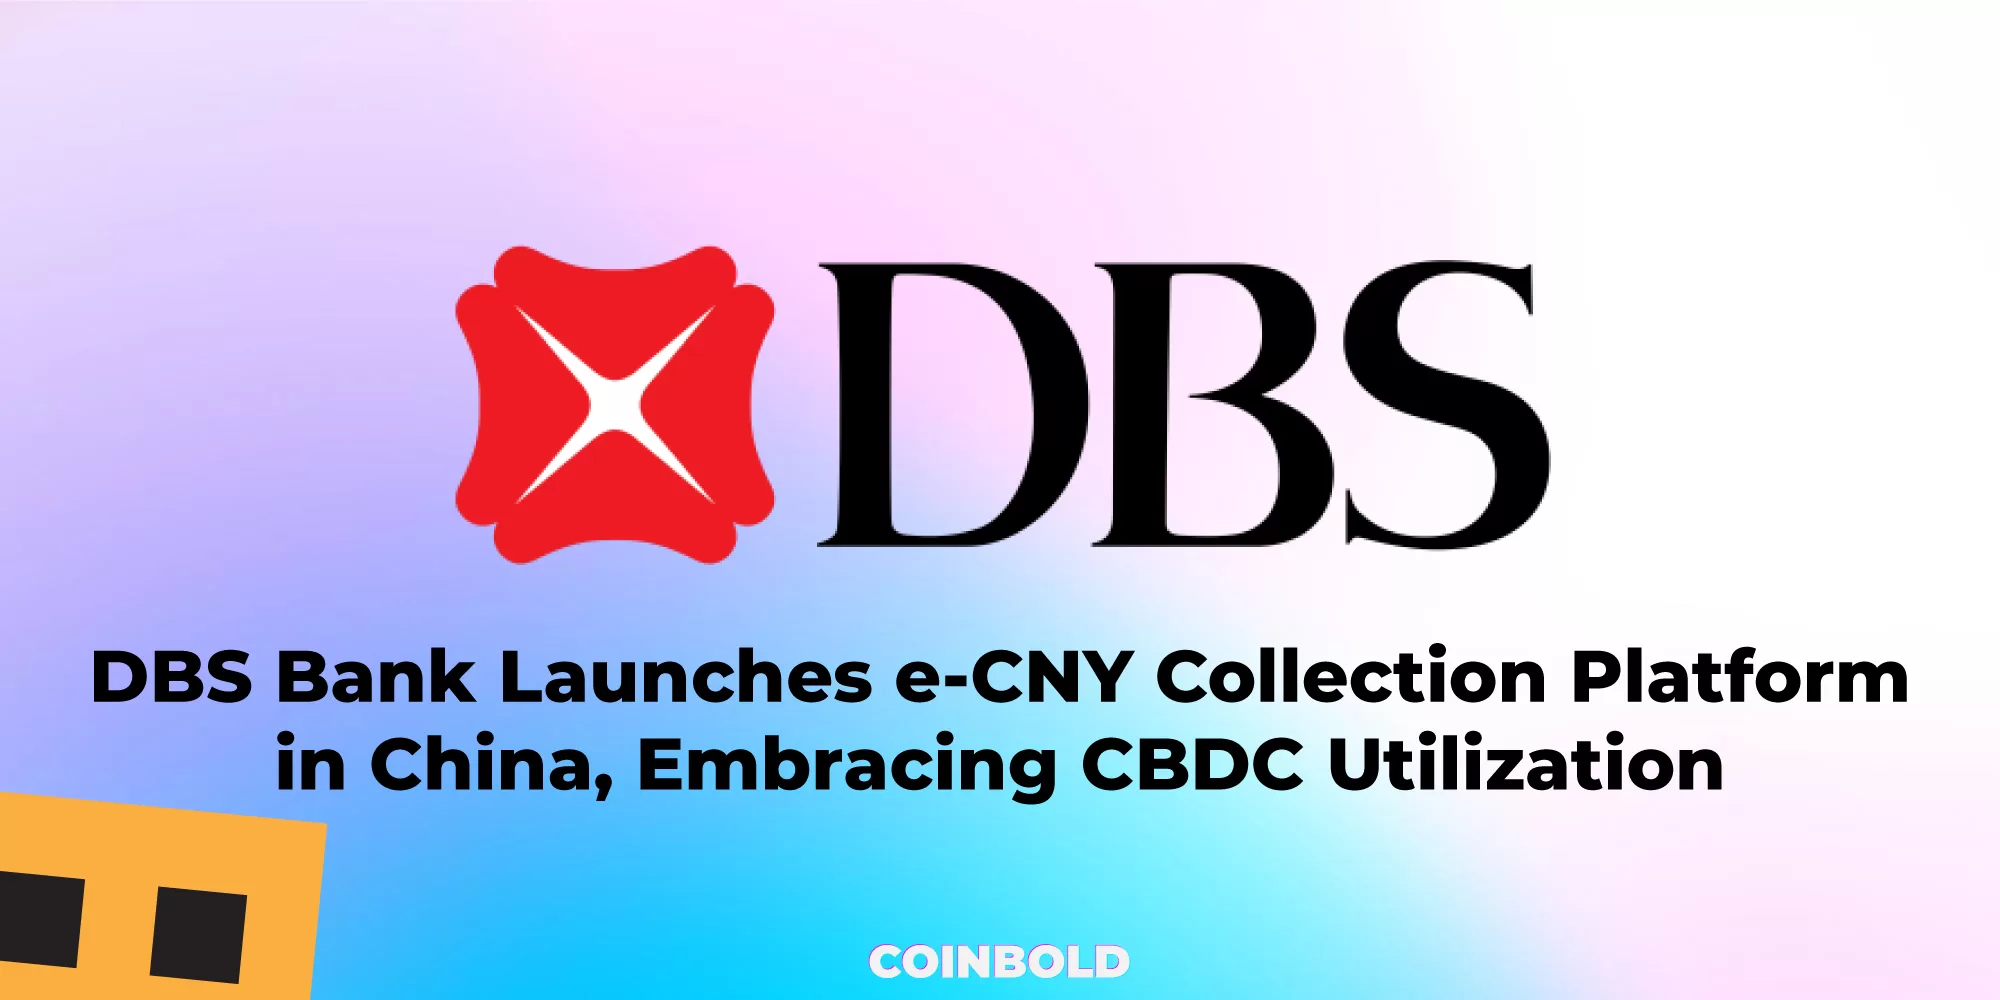 DBS Bank Launches e-CNY Collection Platform in China, Embracing CBDC Utilization